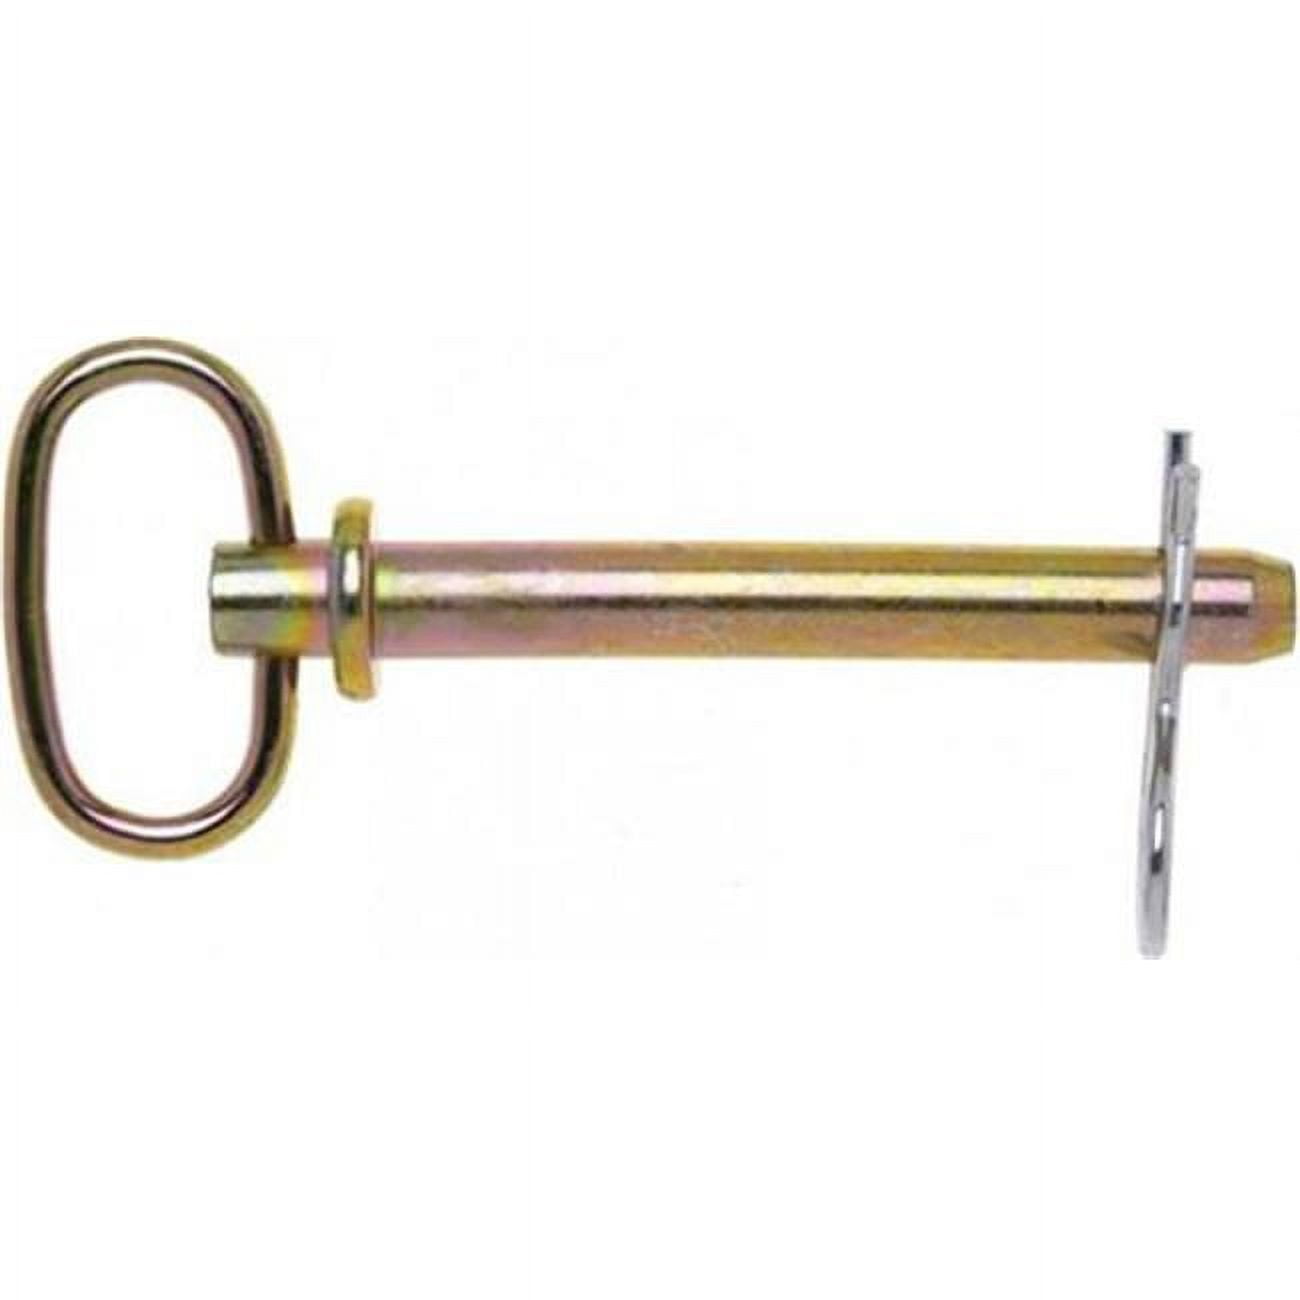 B3899852 0.16 In. Campbell Hitch Pin With Clip, Yellow Zinc Plated - 7 Per Bag